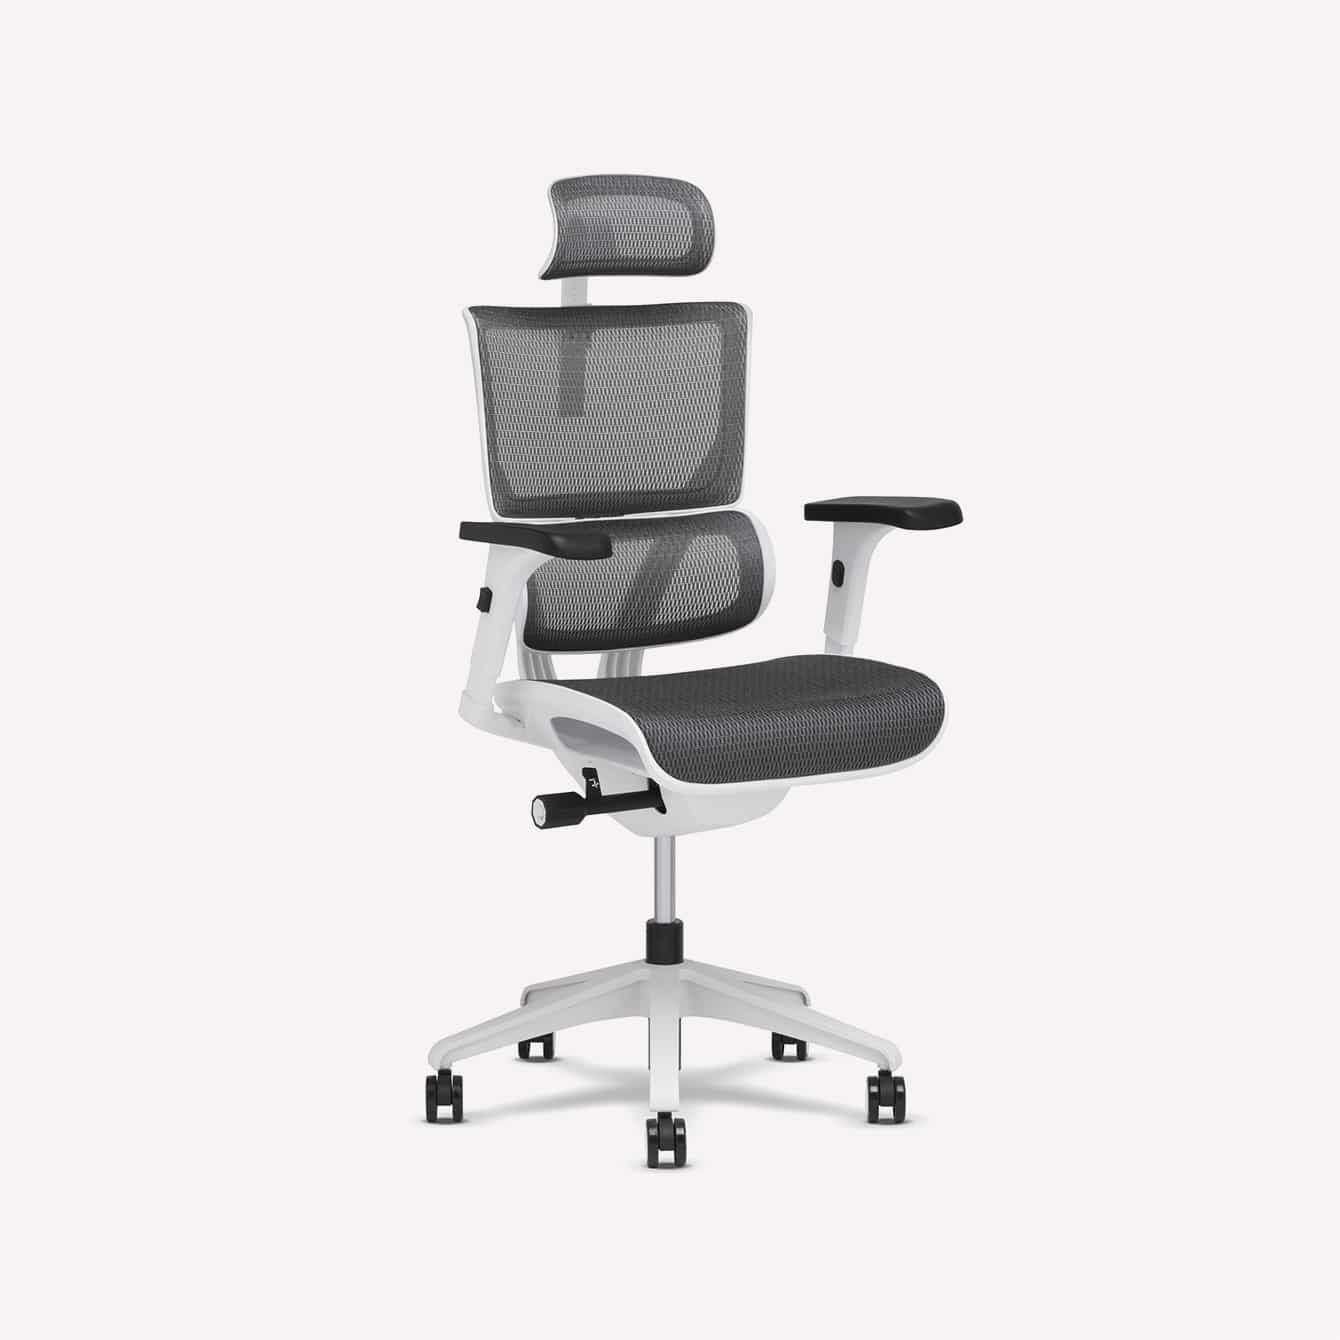 The 15 Best Office Chairs for Short People under 5